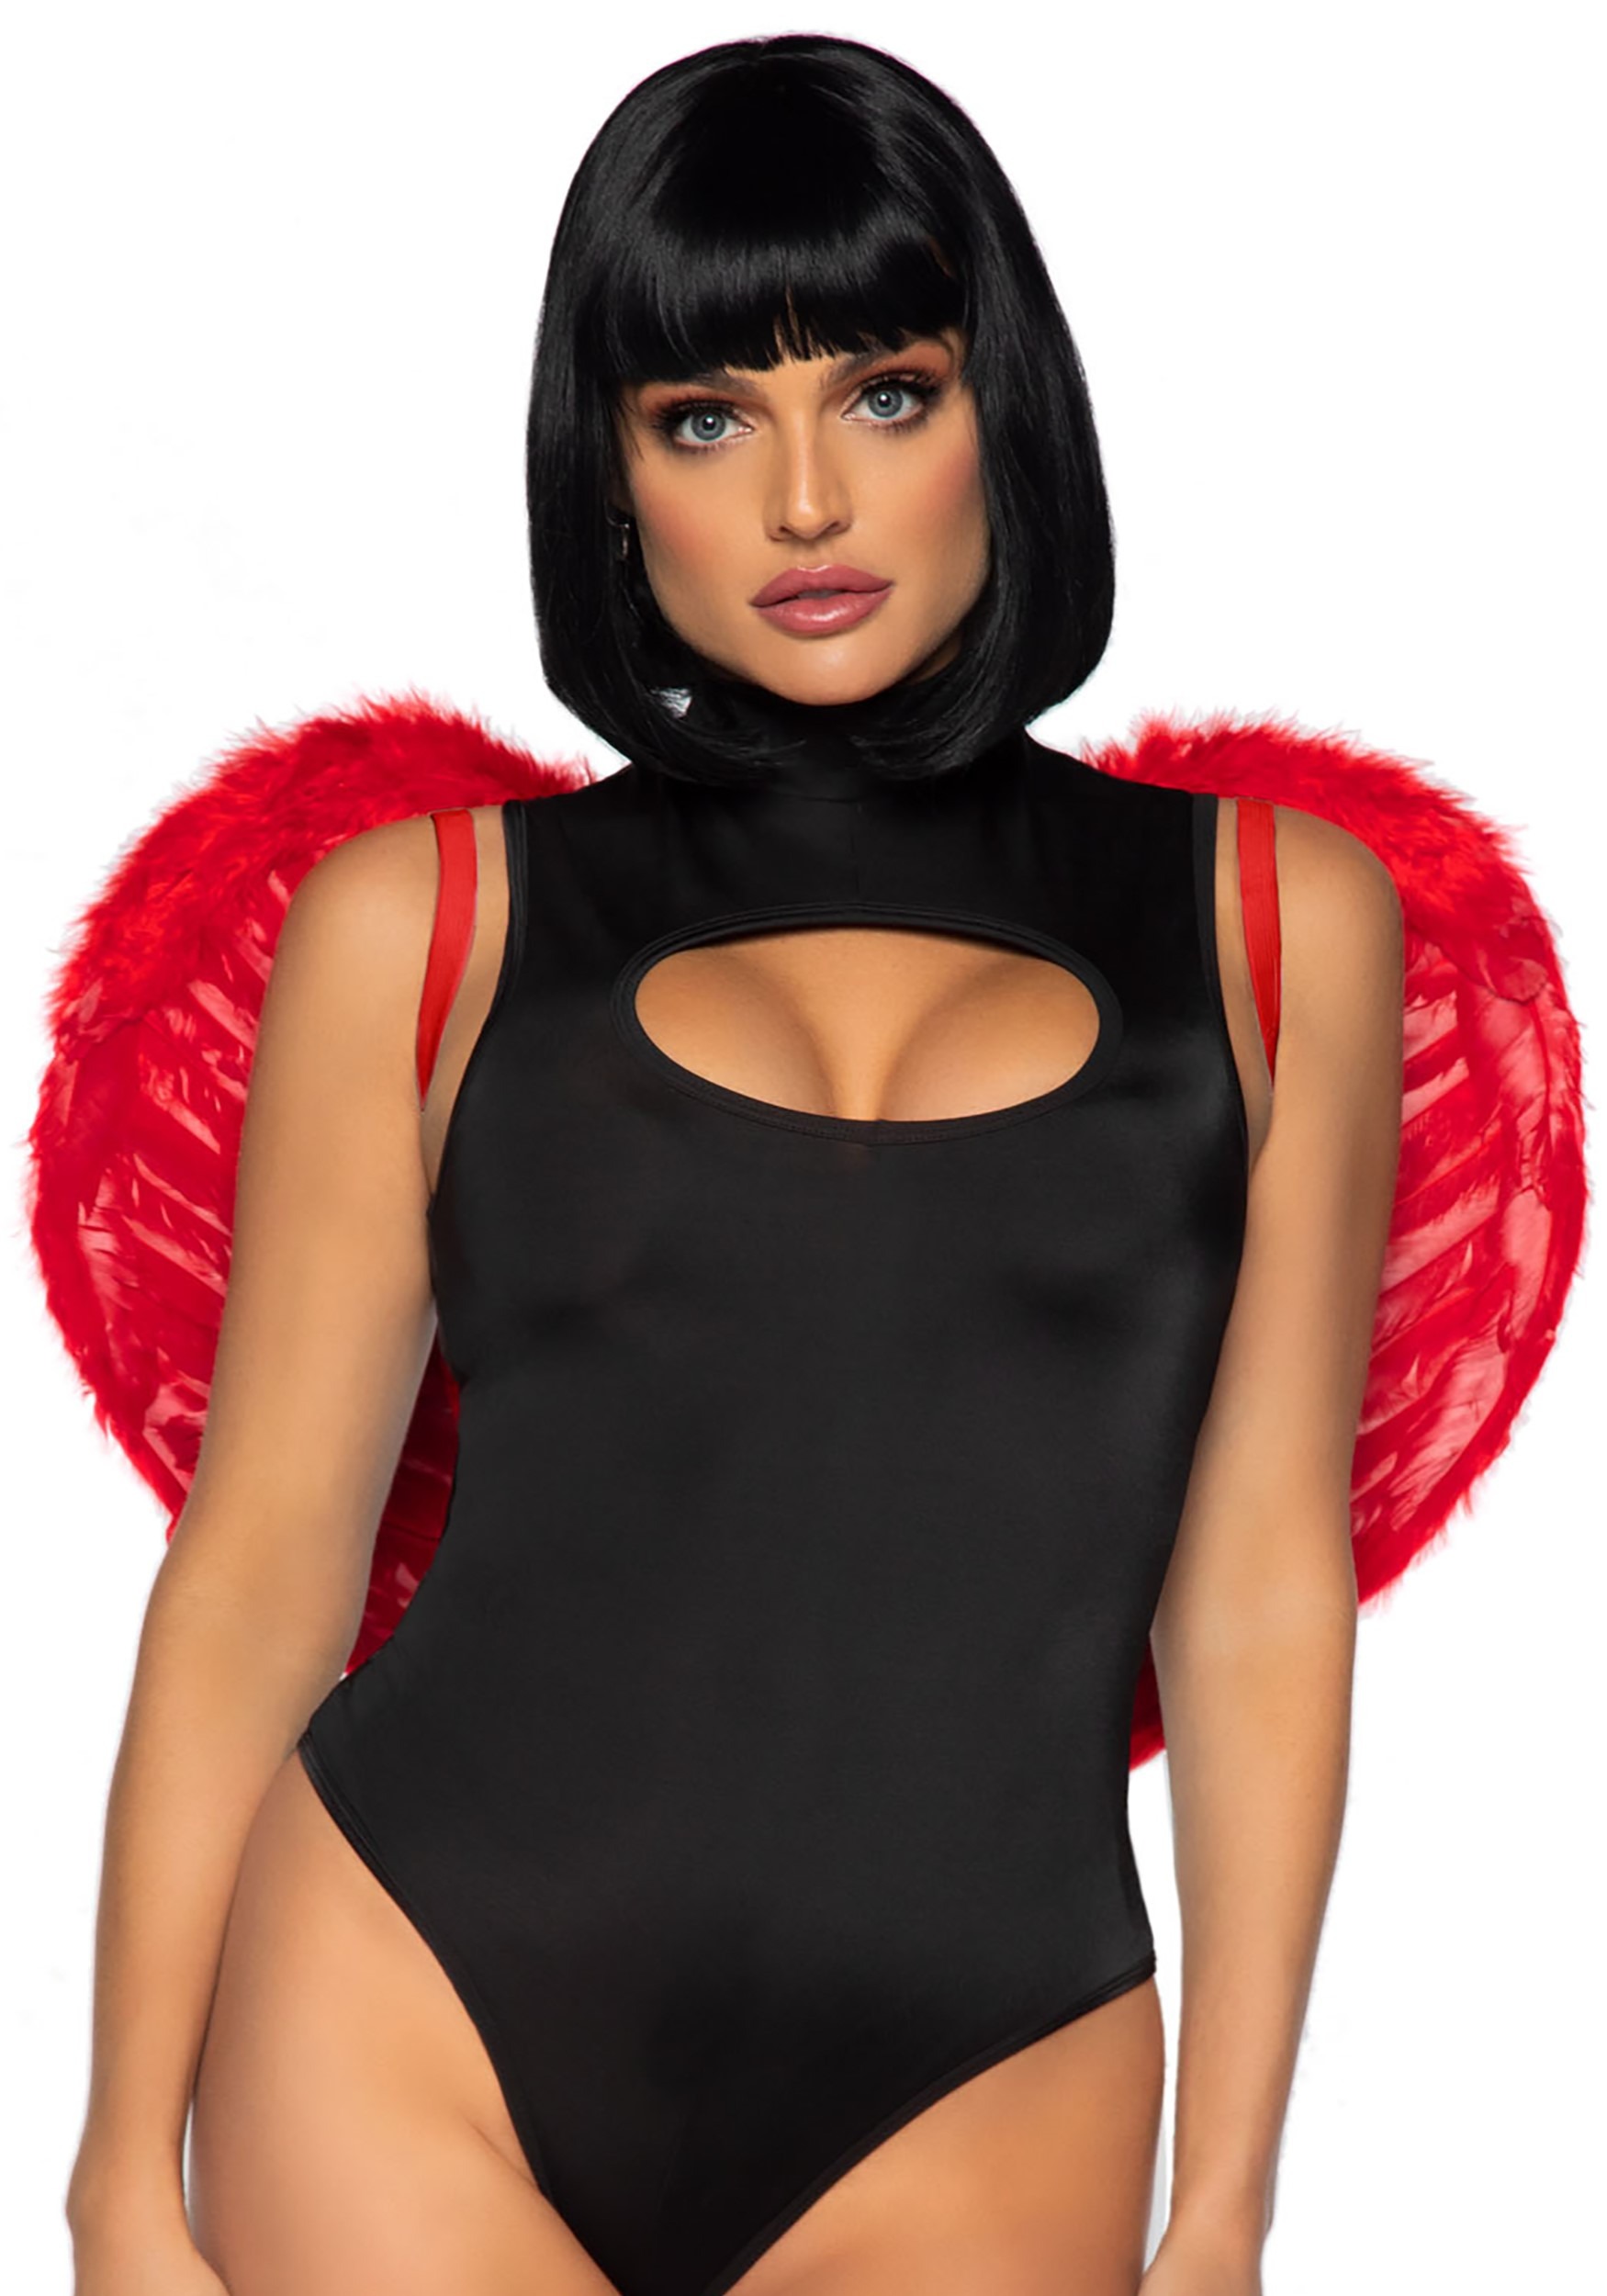 Photos - Fancy Dress MKW Leg Avenue Trimmed Marabou Red Feather Wings 